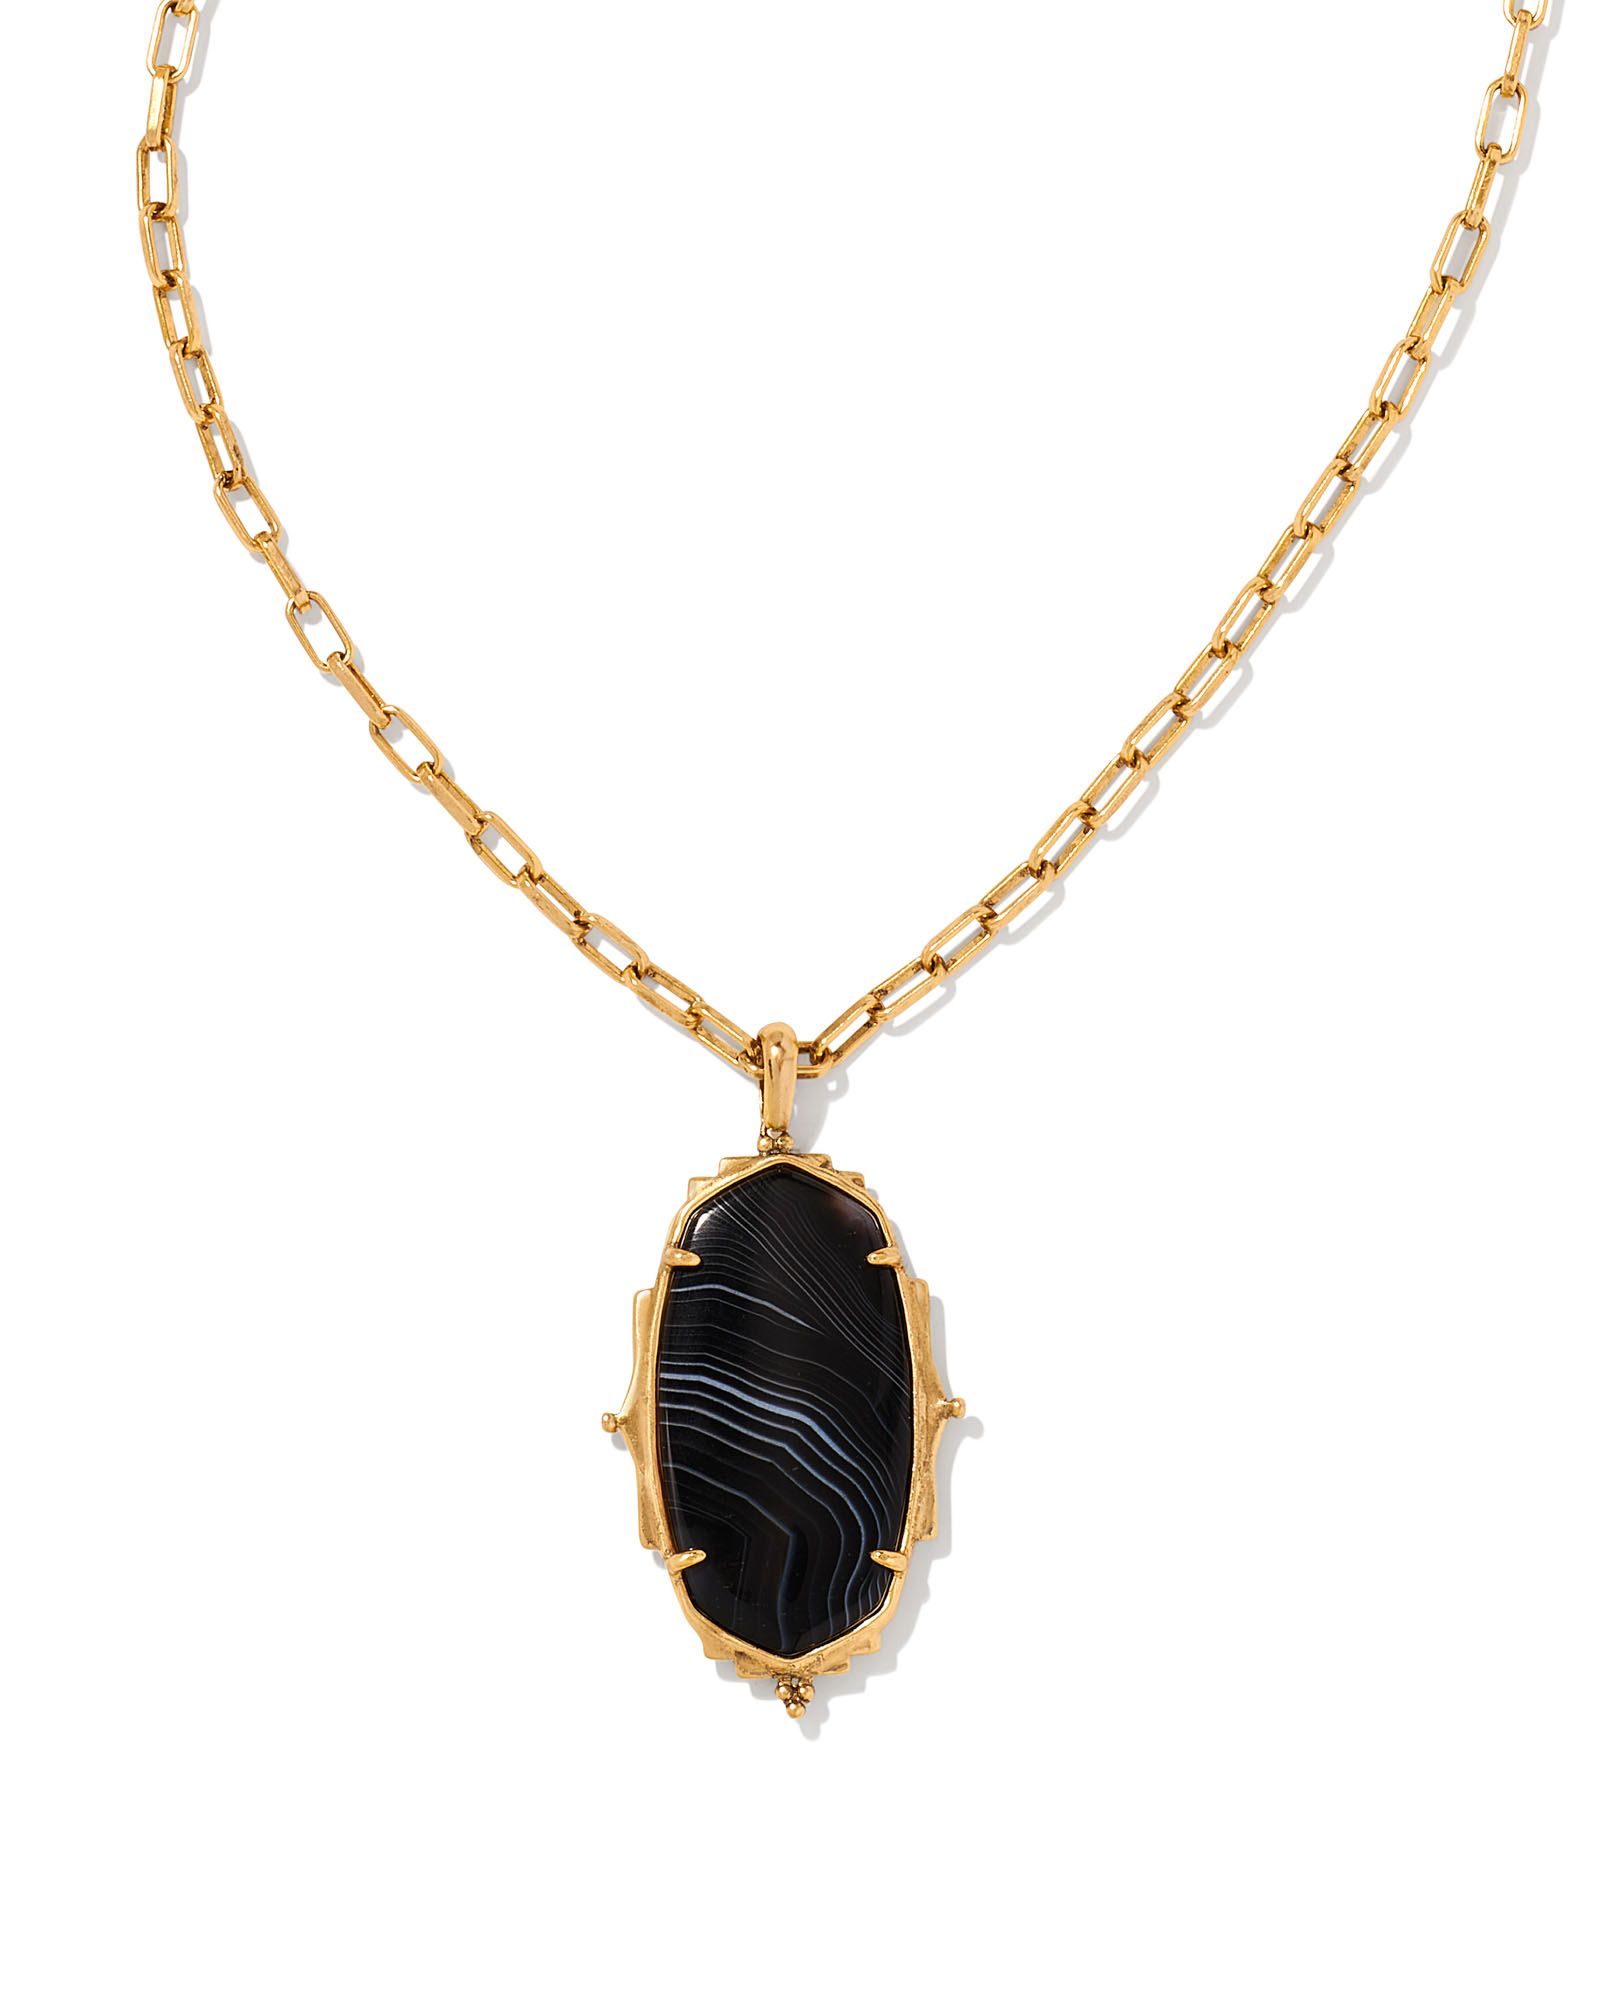 Baroque Vintage Gold Ella Long Pendant Necklace in Natural Mother-of-Pearl | Kendra Scott